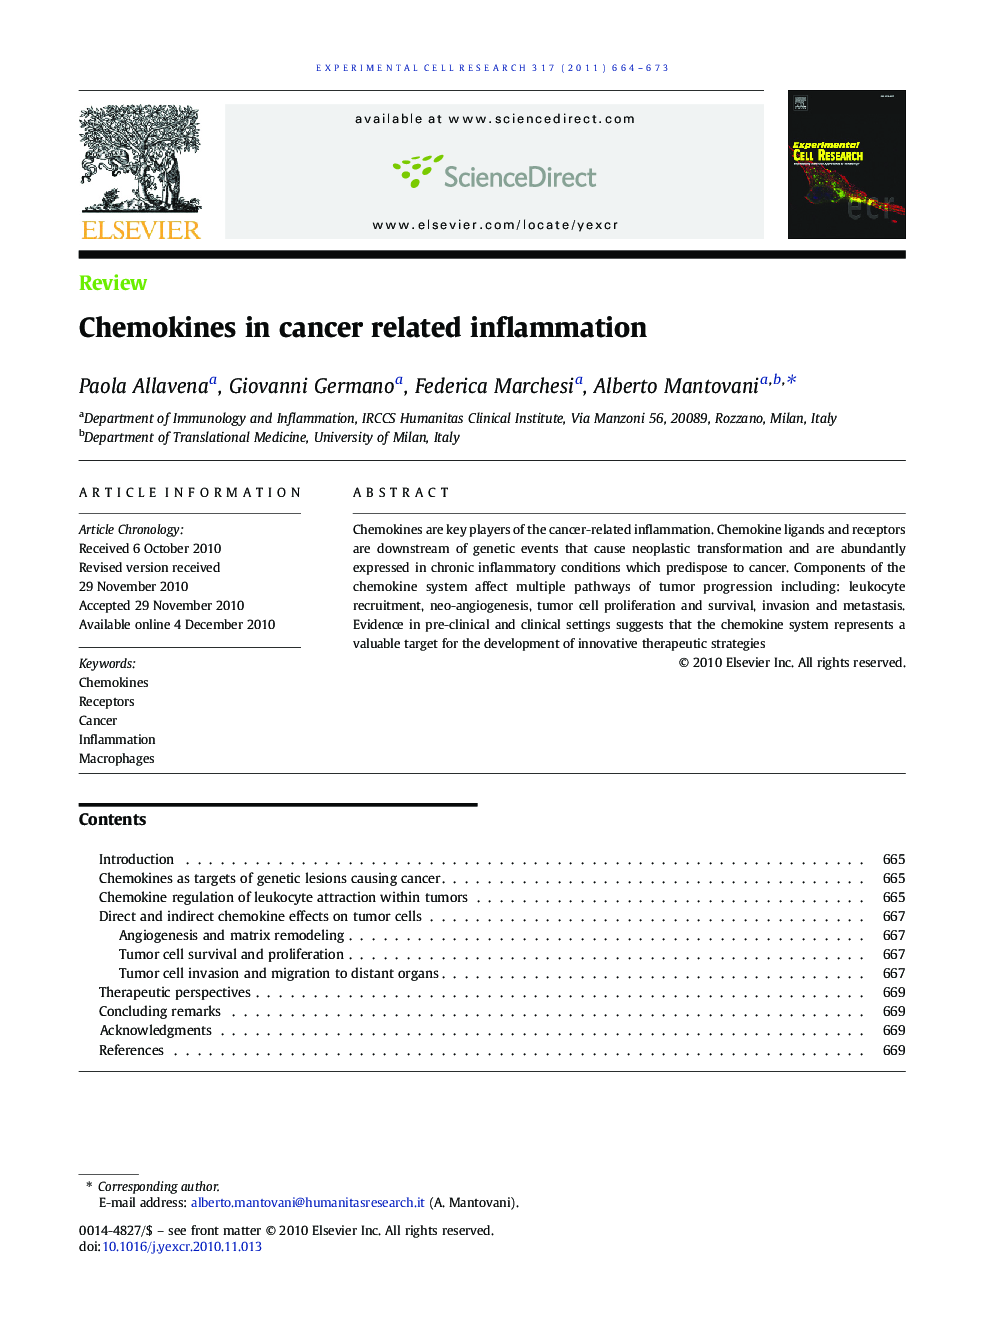 Chemokines in cancer related inflammation